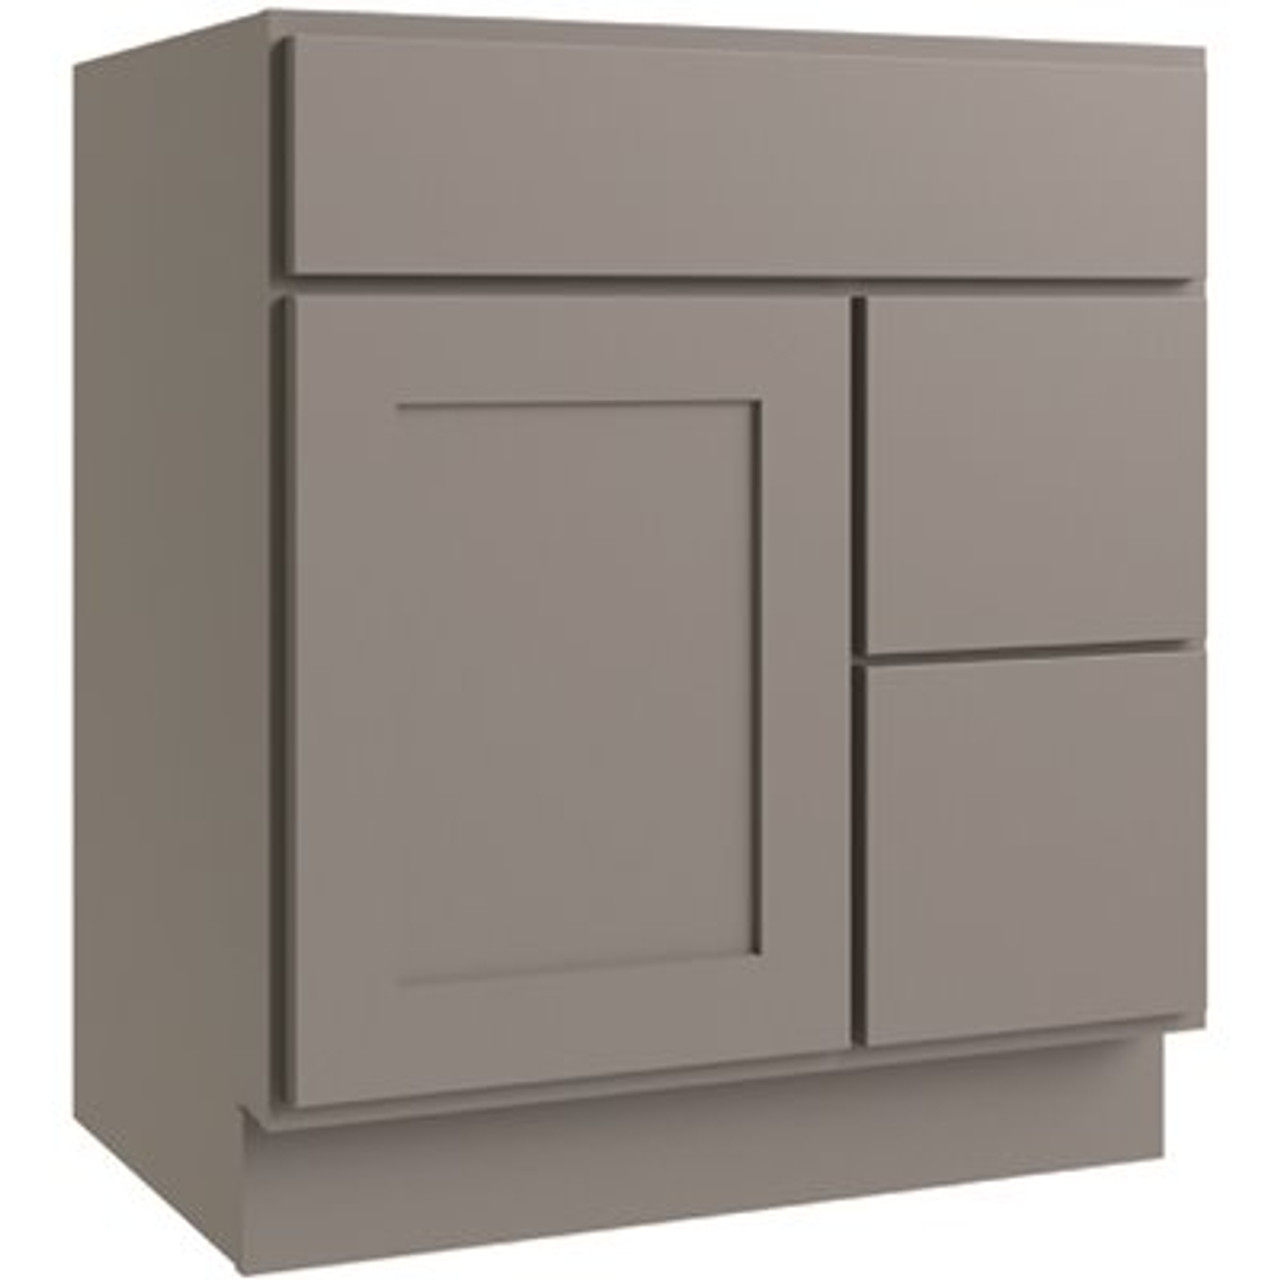 CNC Cabinetry Luxor Vanity Base Cabinet, 30"w X 32.5"h X 21"d, Shaker Misty Grey